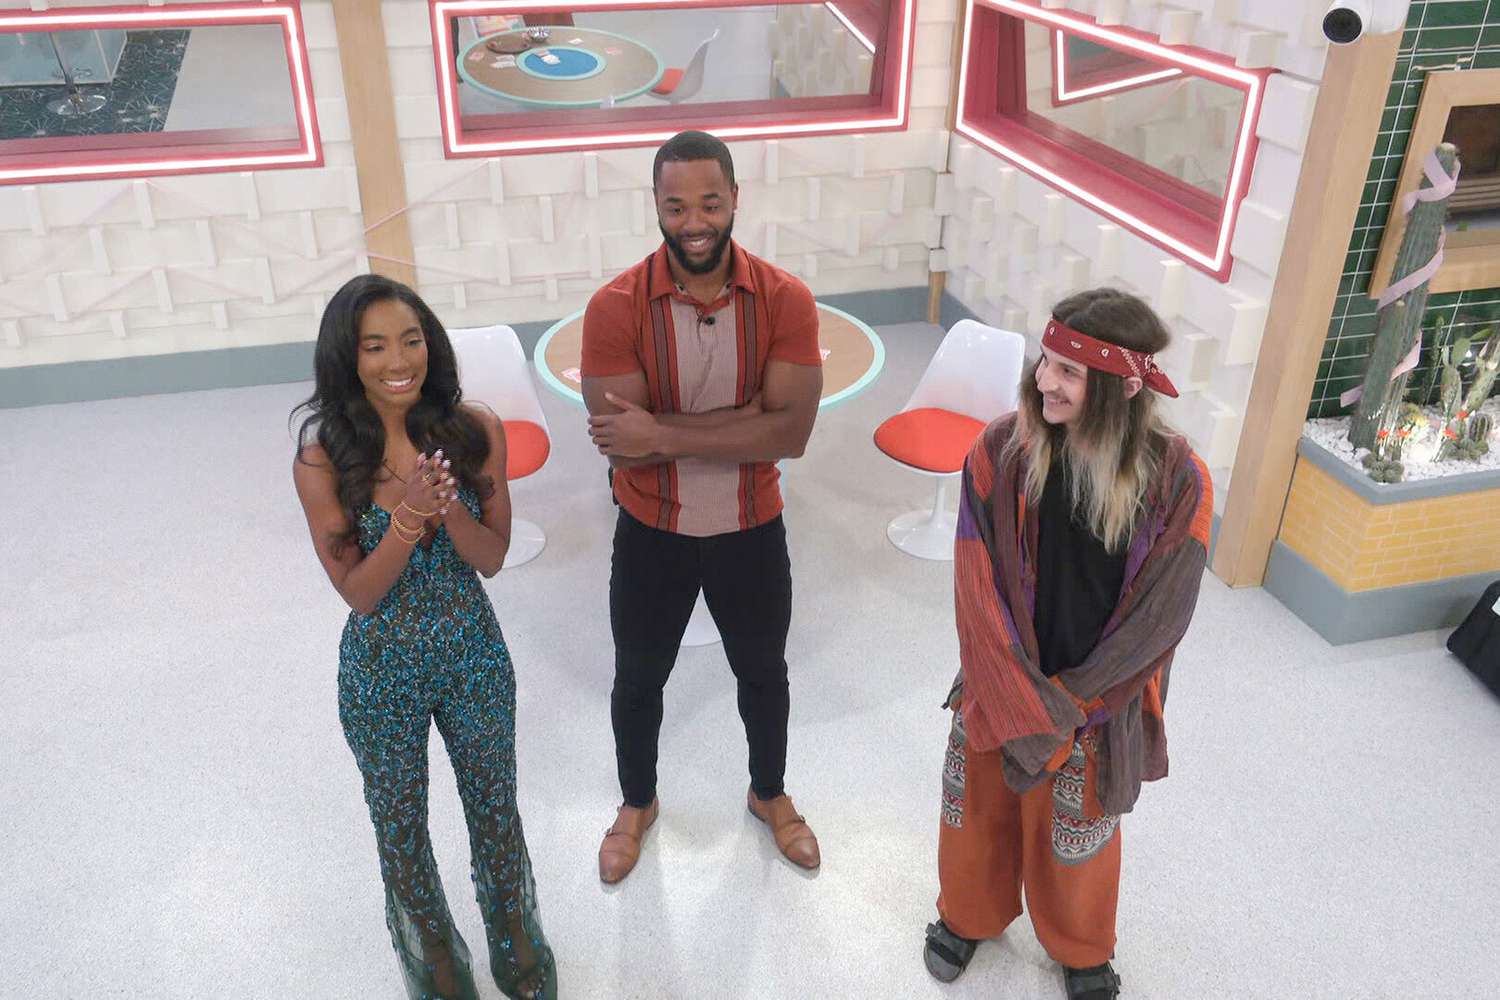 BIG BROTHER Thursday, August 4, (8:00 – 9:00 PM ET/PT on the CBS Television Network and live streaming on Paramount+. Pictured: Taylor Hale, Monte Taylor and Matthew Turner. Photo: CBS ©2022 CBS Broadcasting, Inc. All Rights Reserved. Highest quality screengrab available.